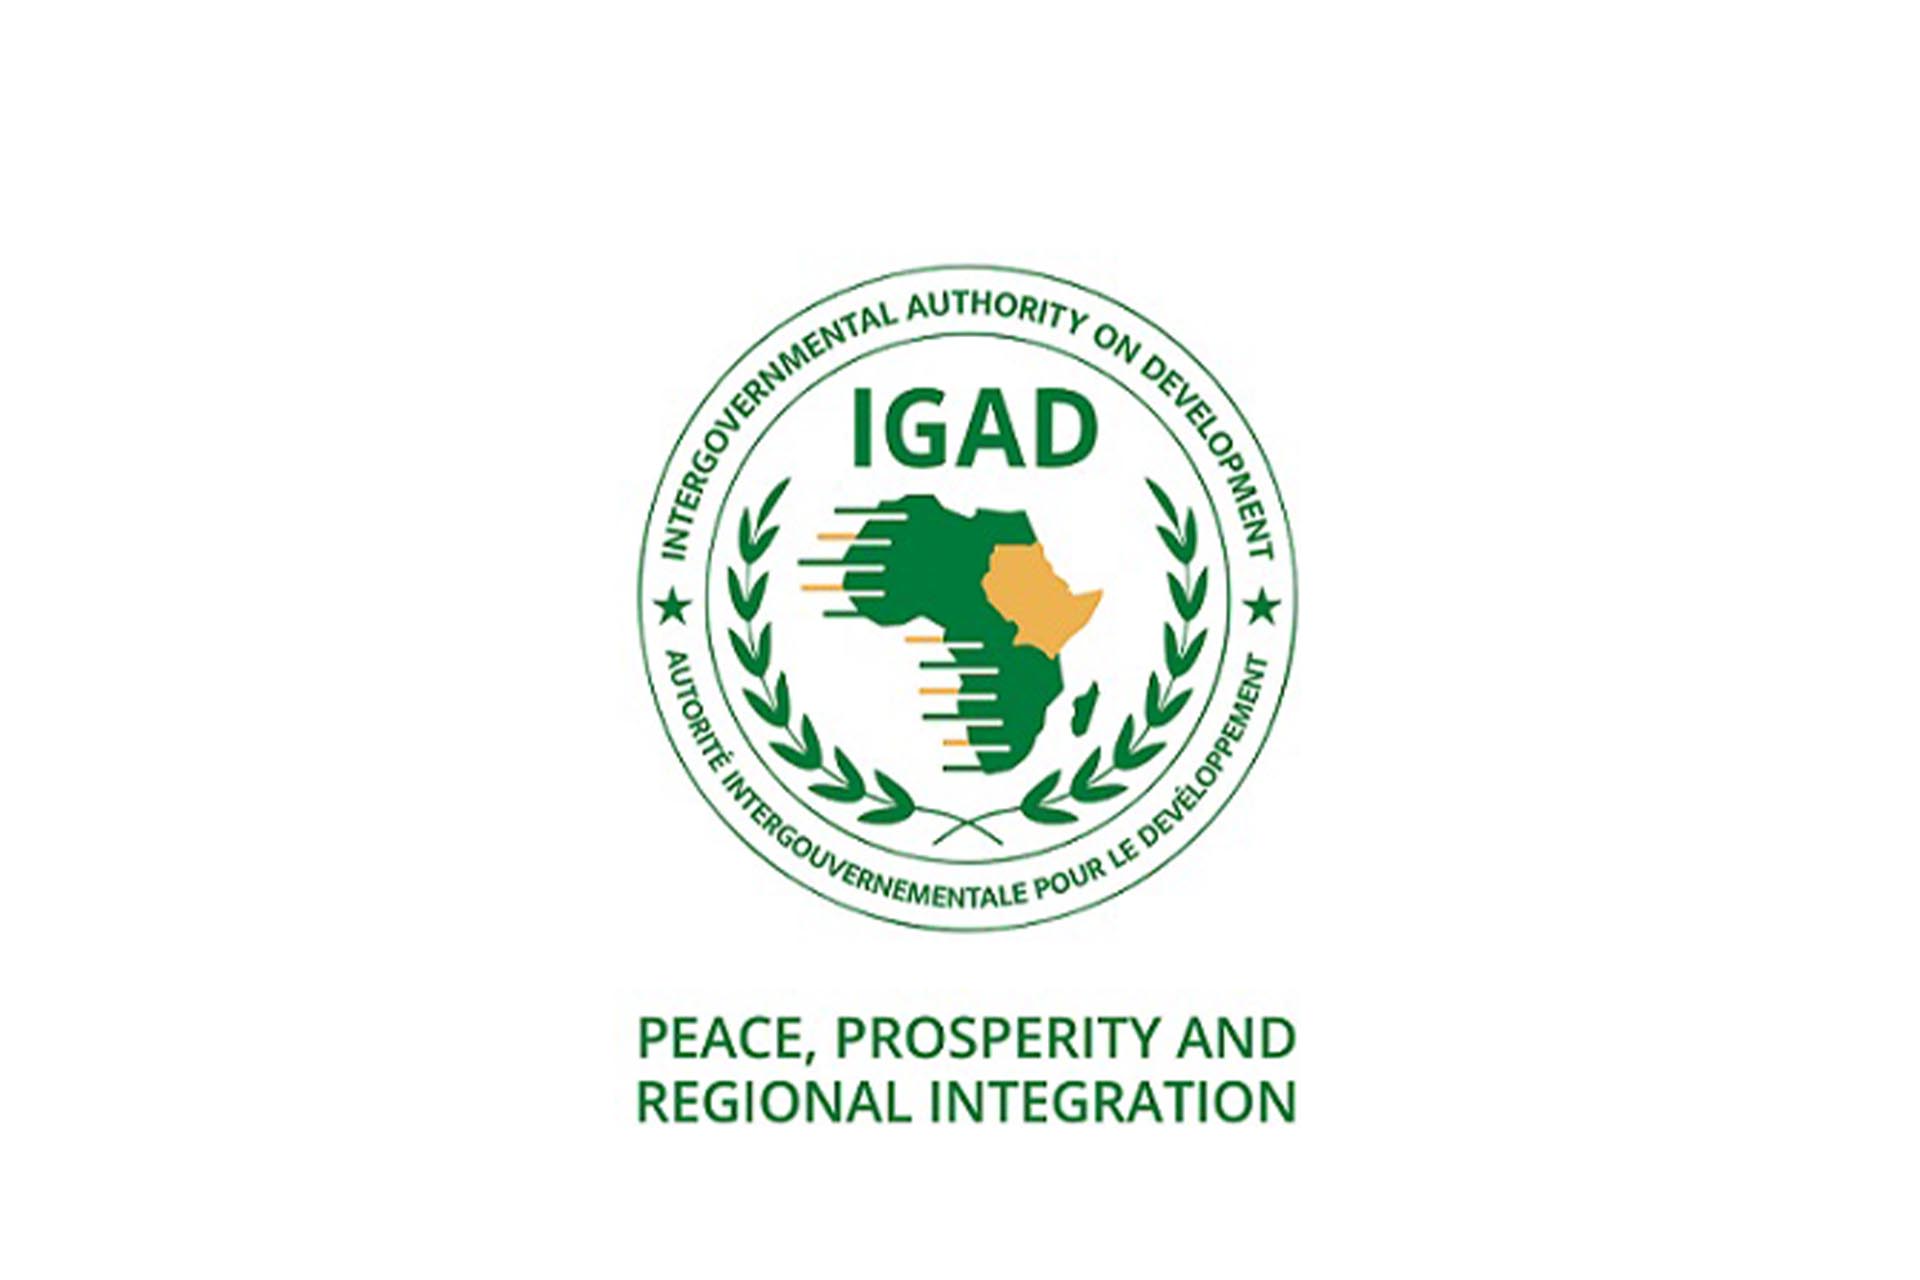 IGAD Centre for Pastoral Areas and Livestock Development (ICPALD)